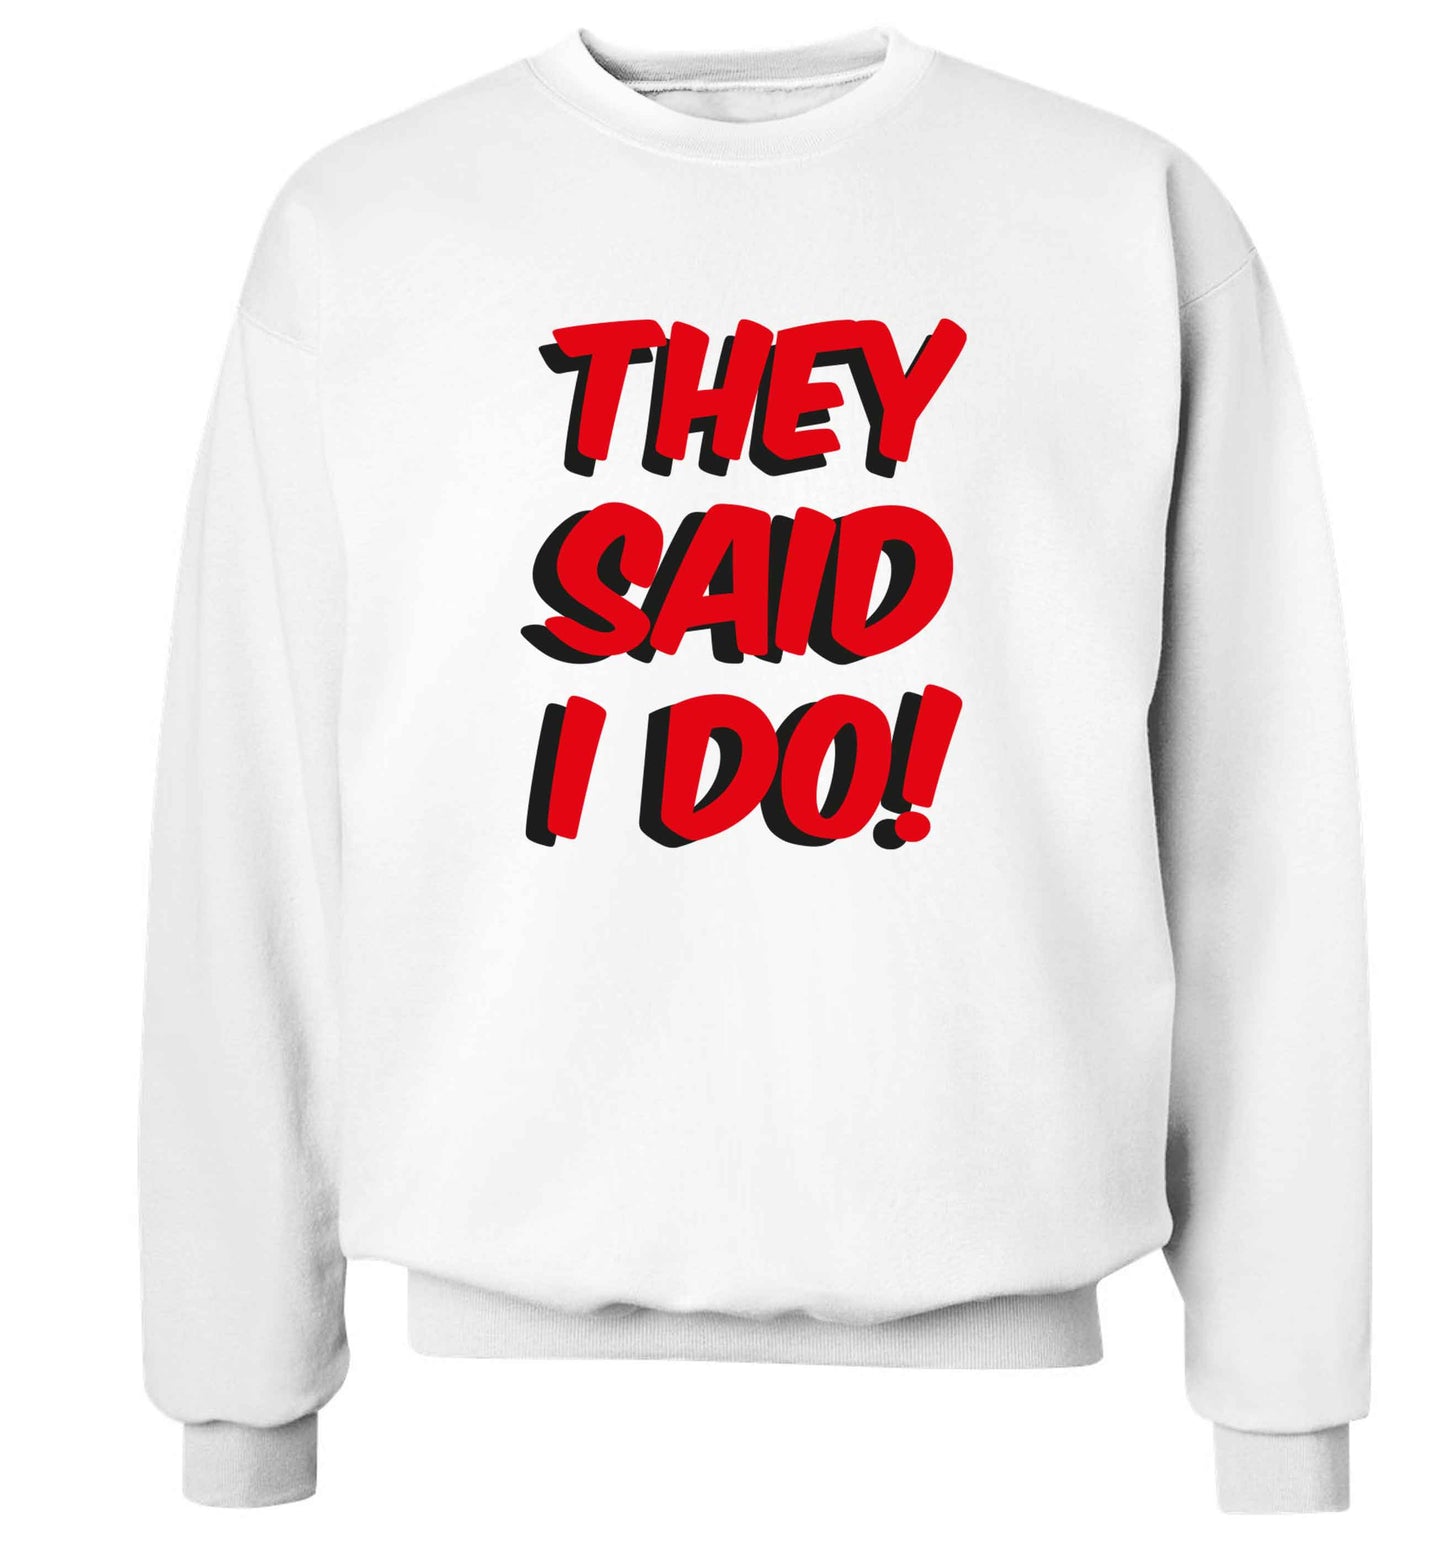 They said I do adult's unisex white sweater 2XL